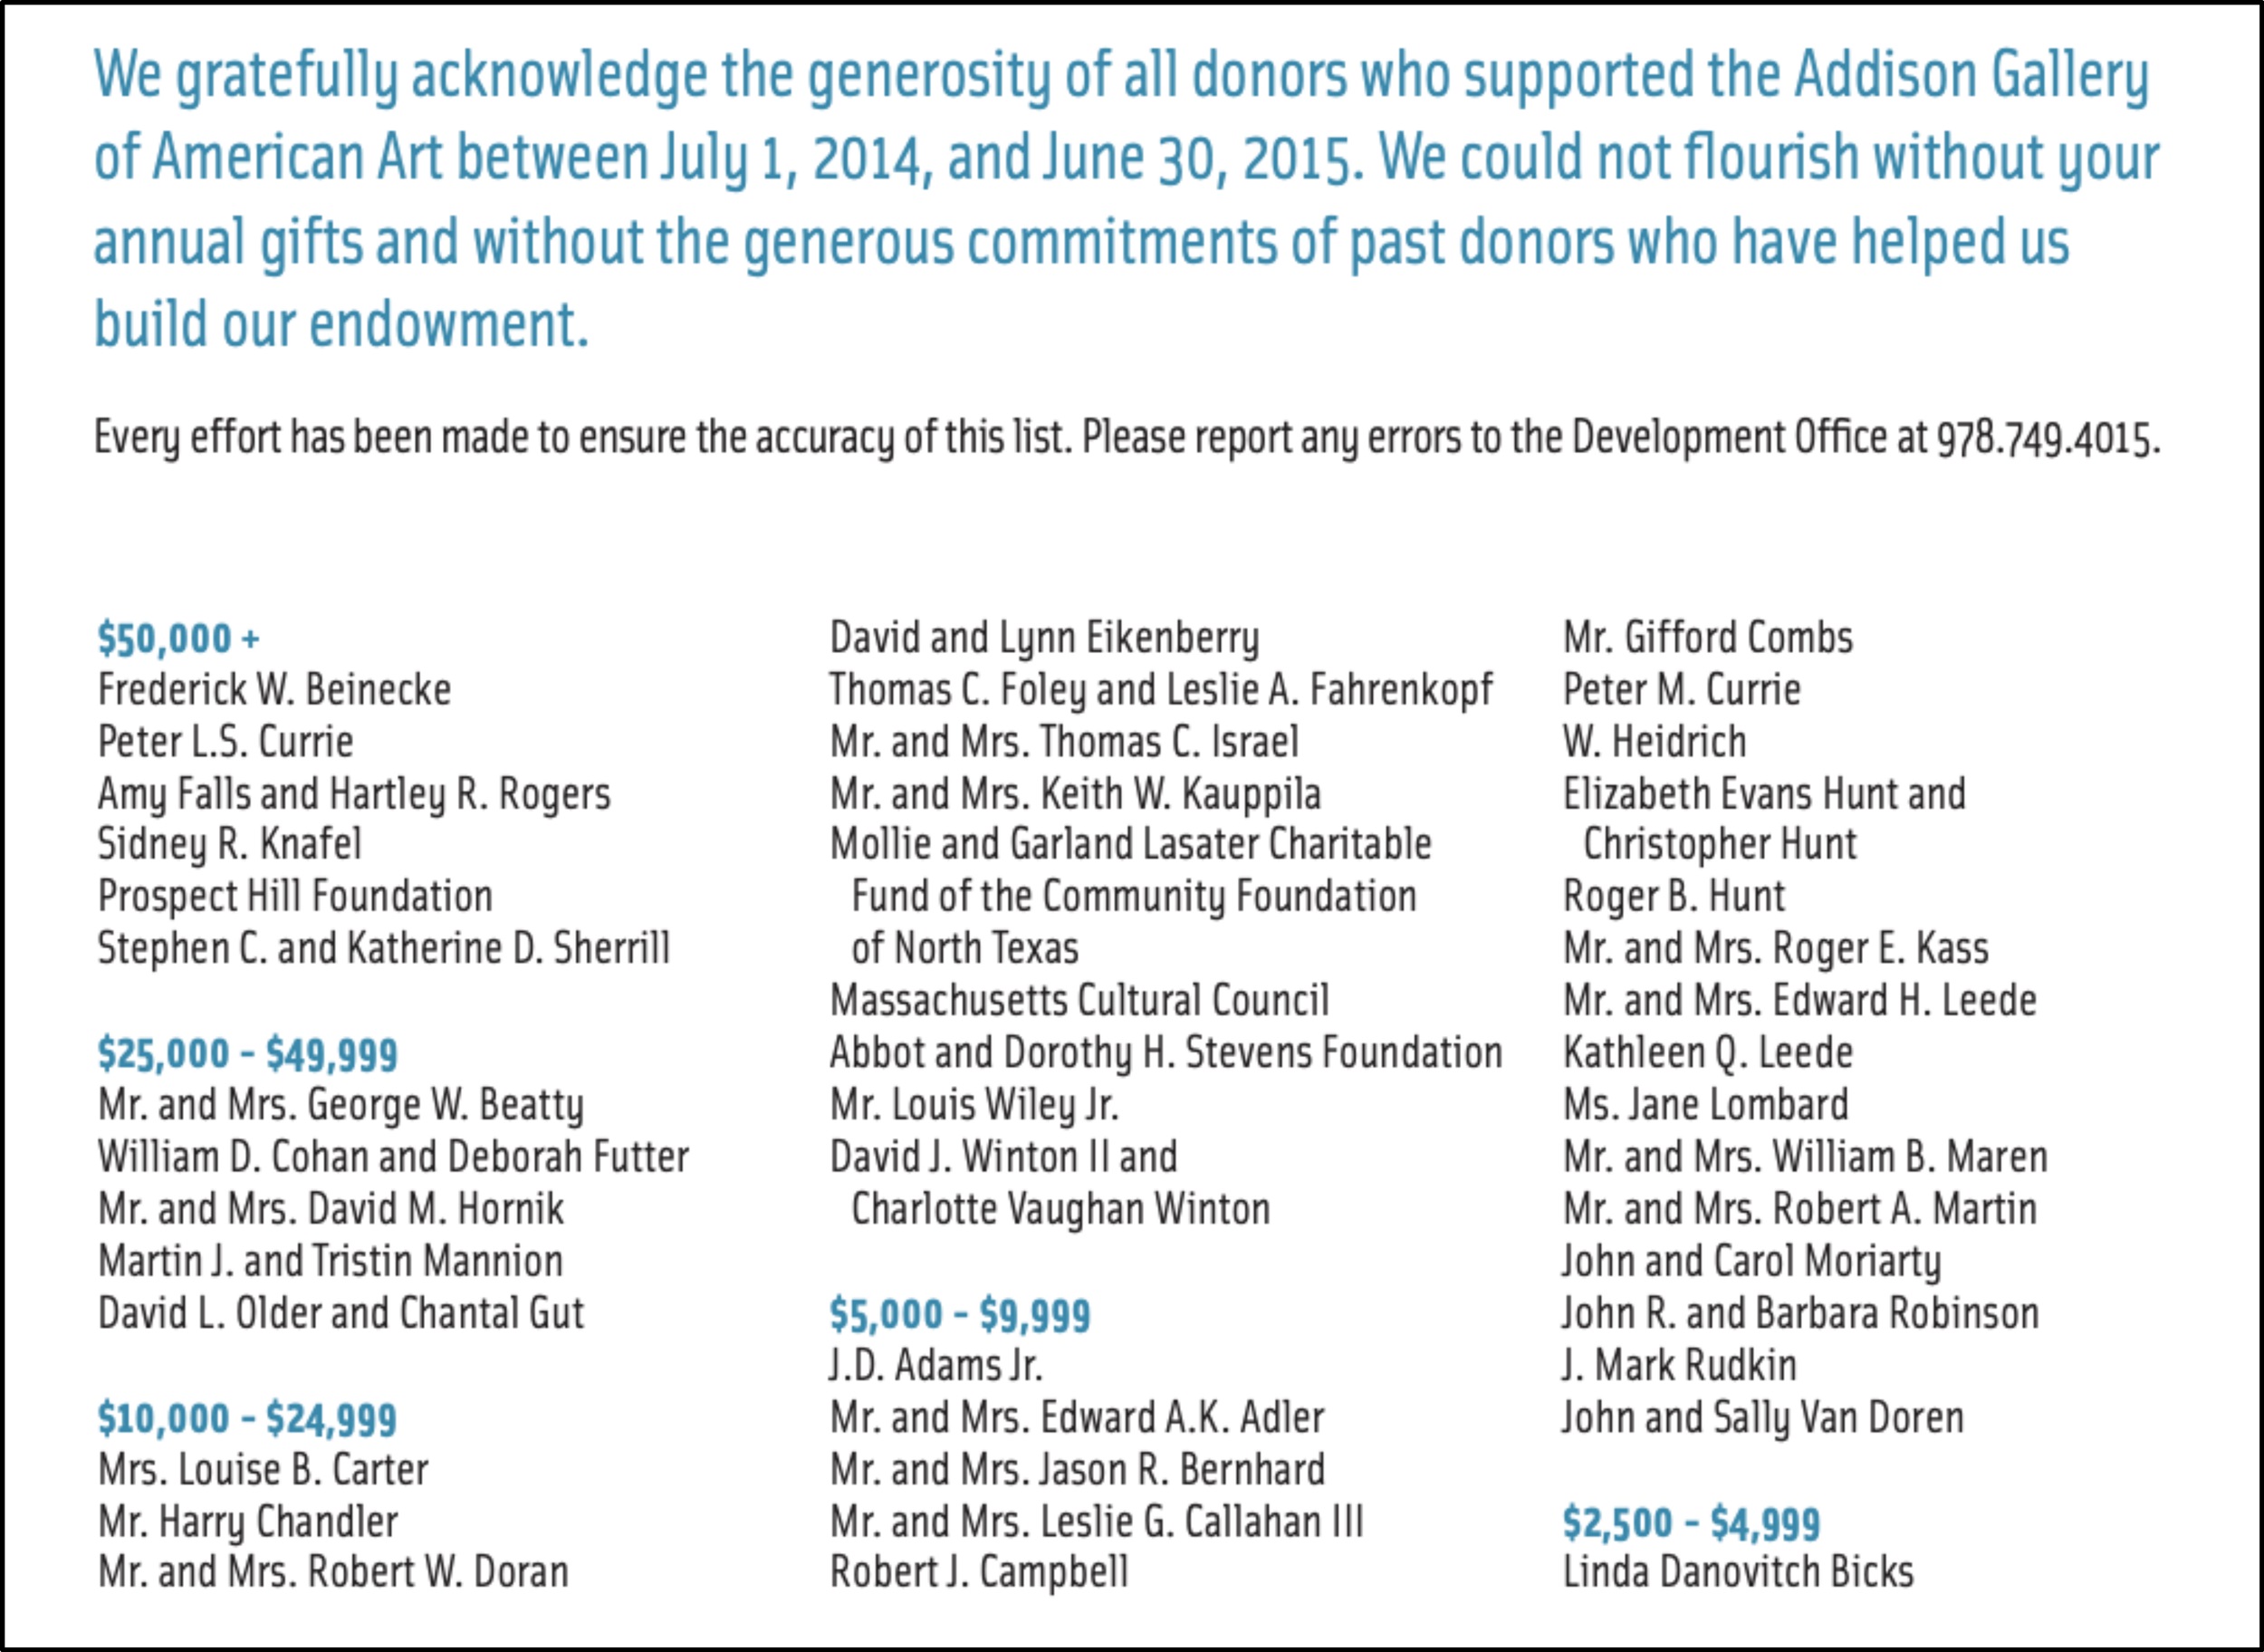 Screenshot of a donor recognition page with the header "We gratefully acknowledge the generosity of all donors who supported the Addison Gallery of American Art between July 1, 2014, and June 30, 2015. We could not flourish without your annual gifts and without the generous commitments of past donors who have helped us build our endowment," followed by a list of donors at various financial levels.